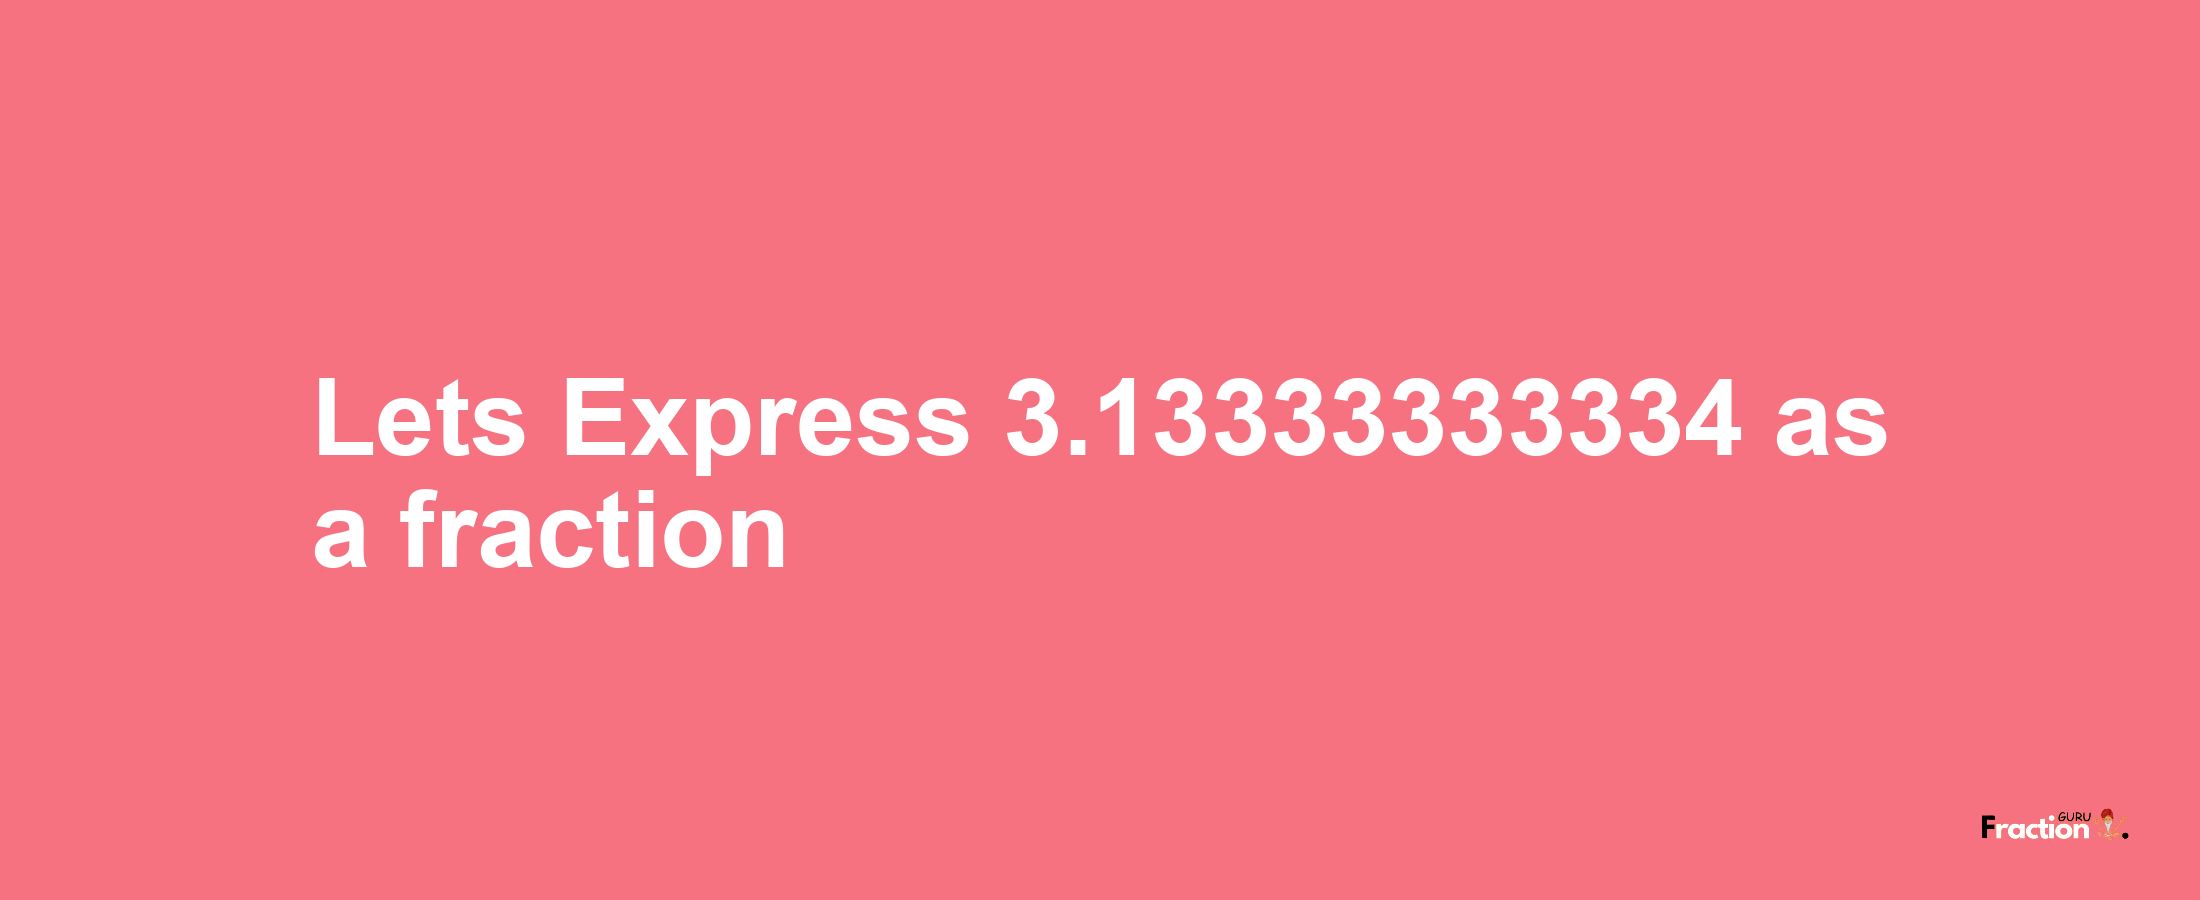 Lets Express 3.13333333334 as afraction